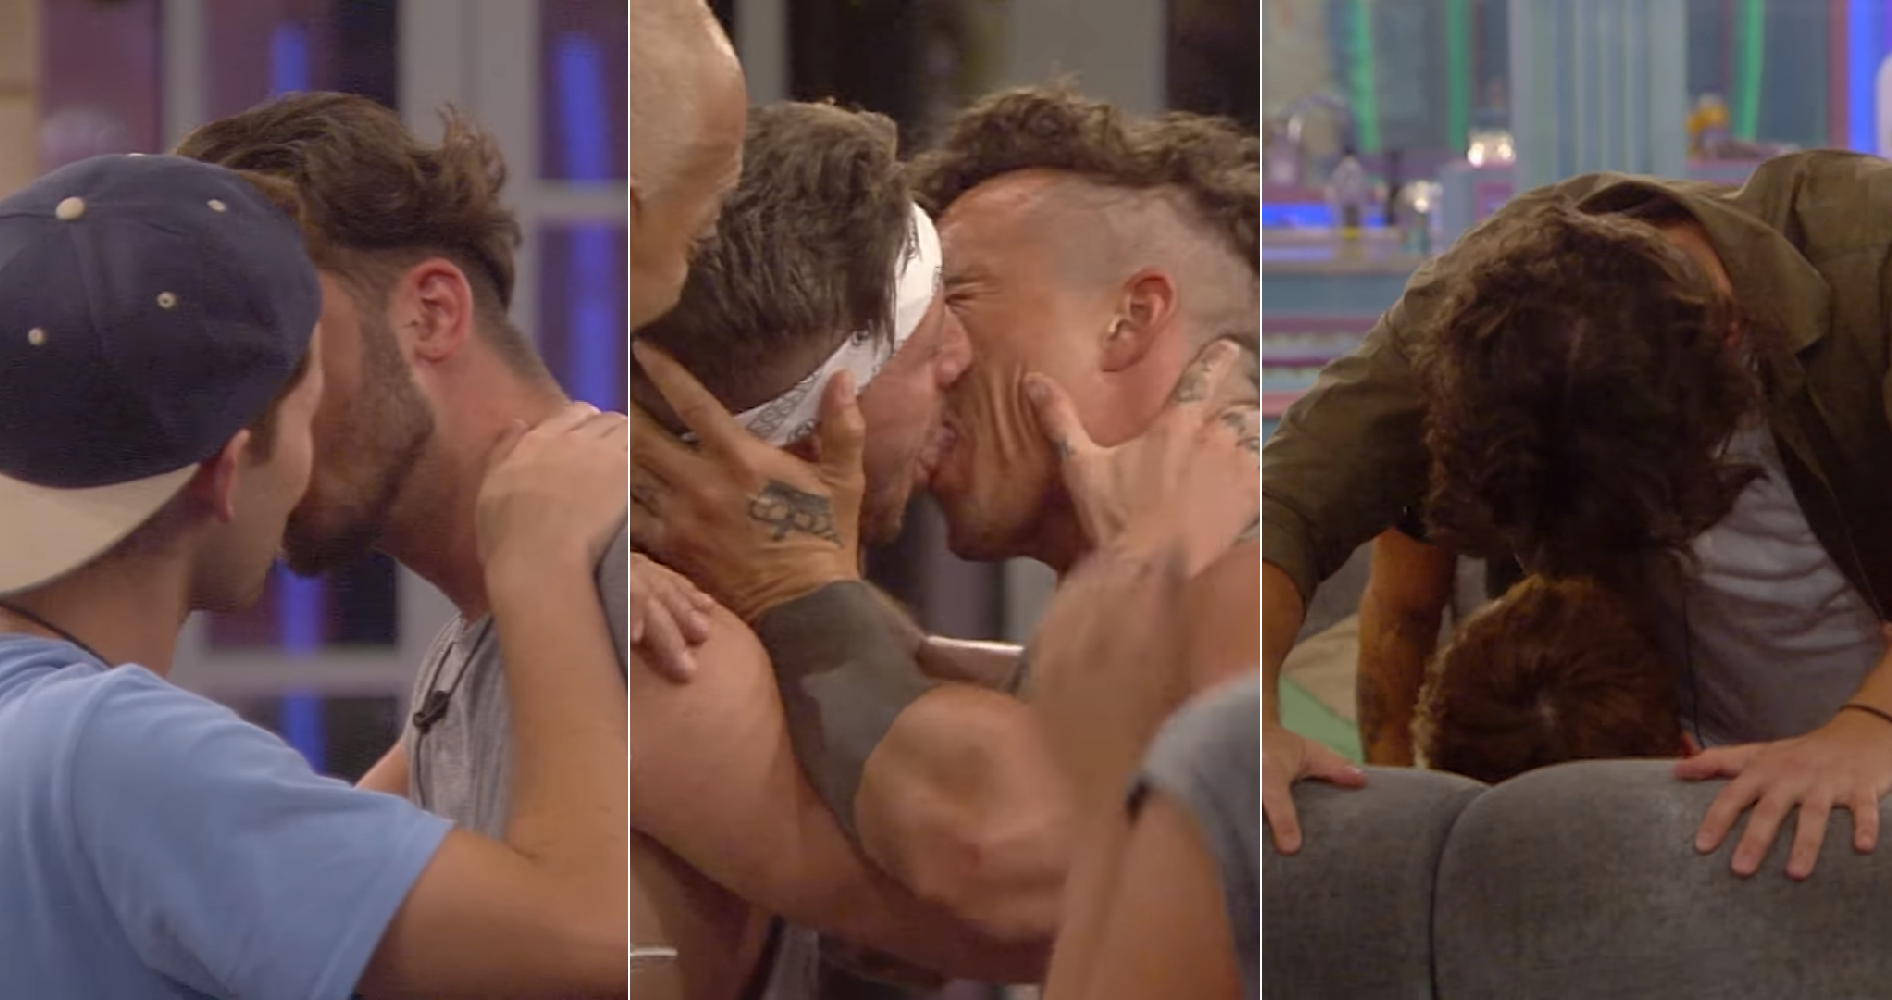 Big Brother Gay Porn - The Big Brother boys can't stop making out with each other - WATCH -  Attitude